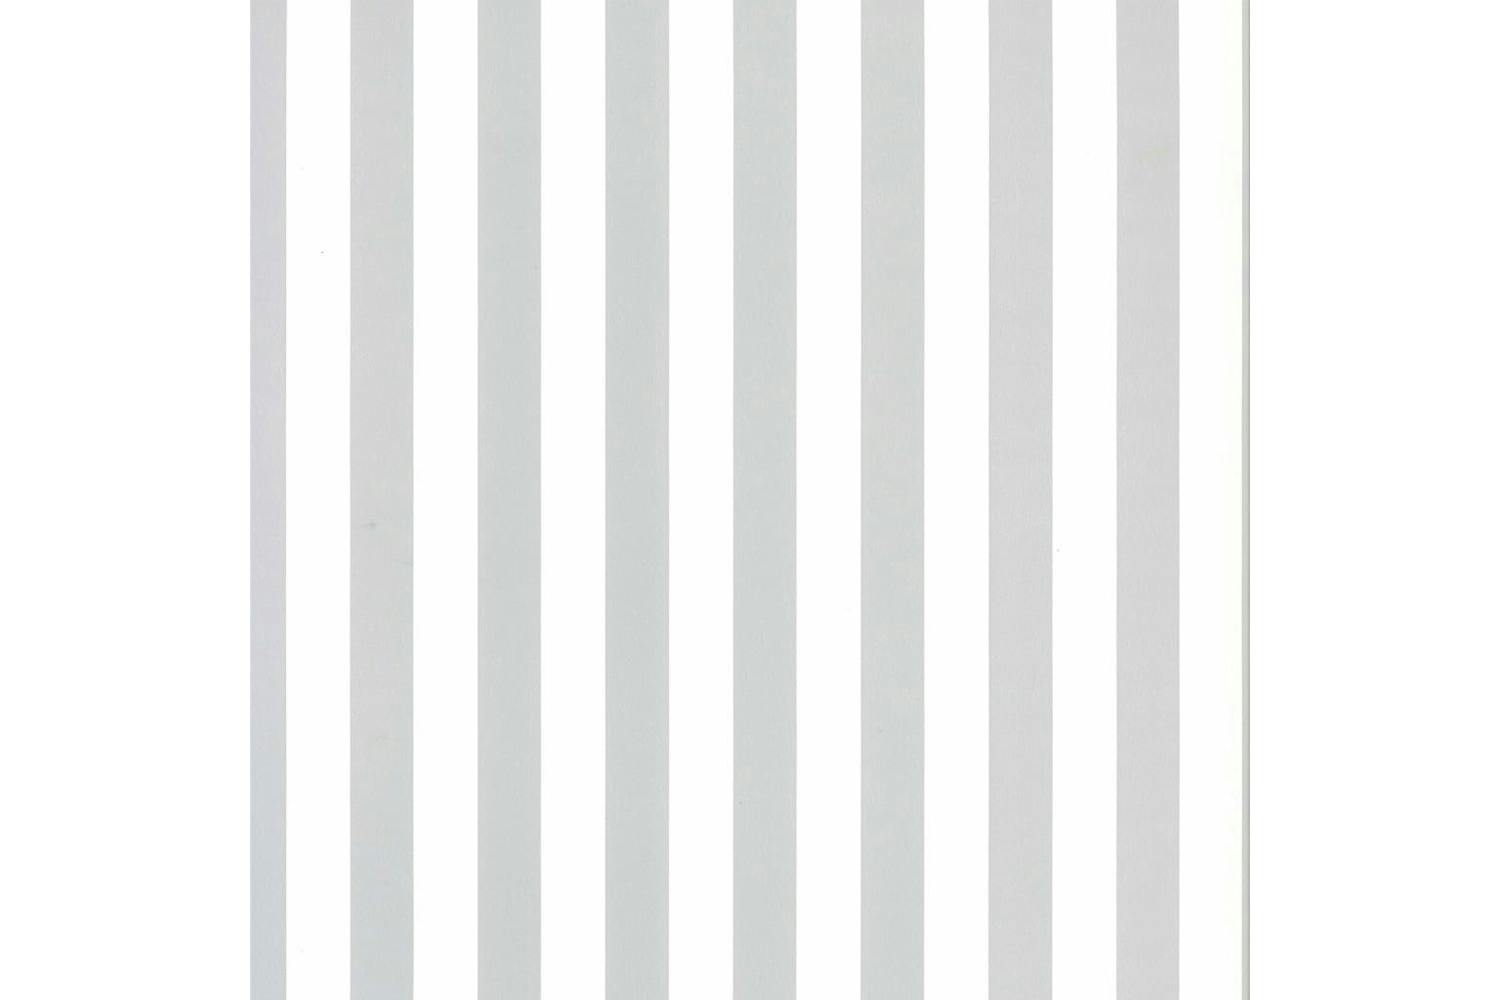 Noordwand 422676 Fabulous World Wallpaper Stripes White And Light Grey 67103-3